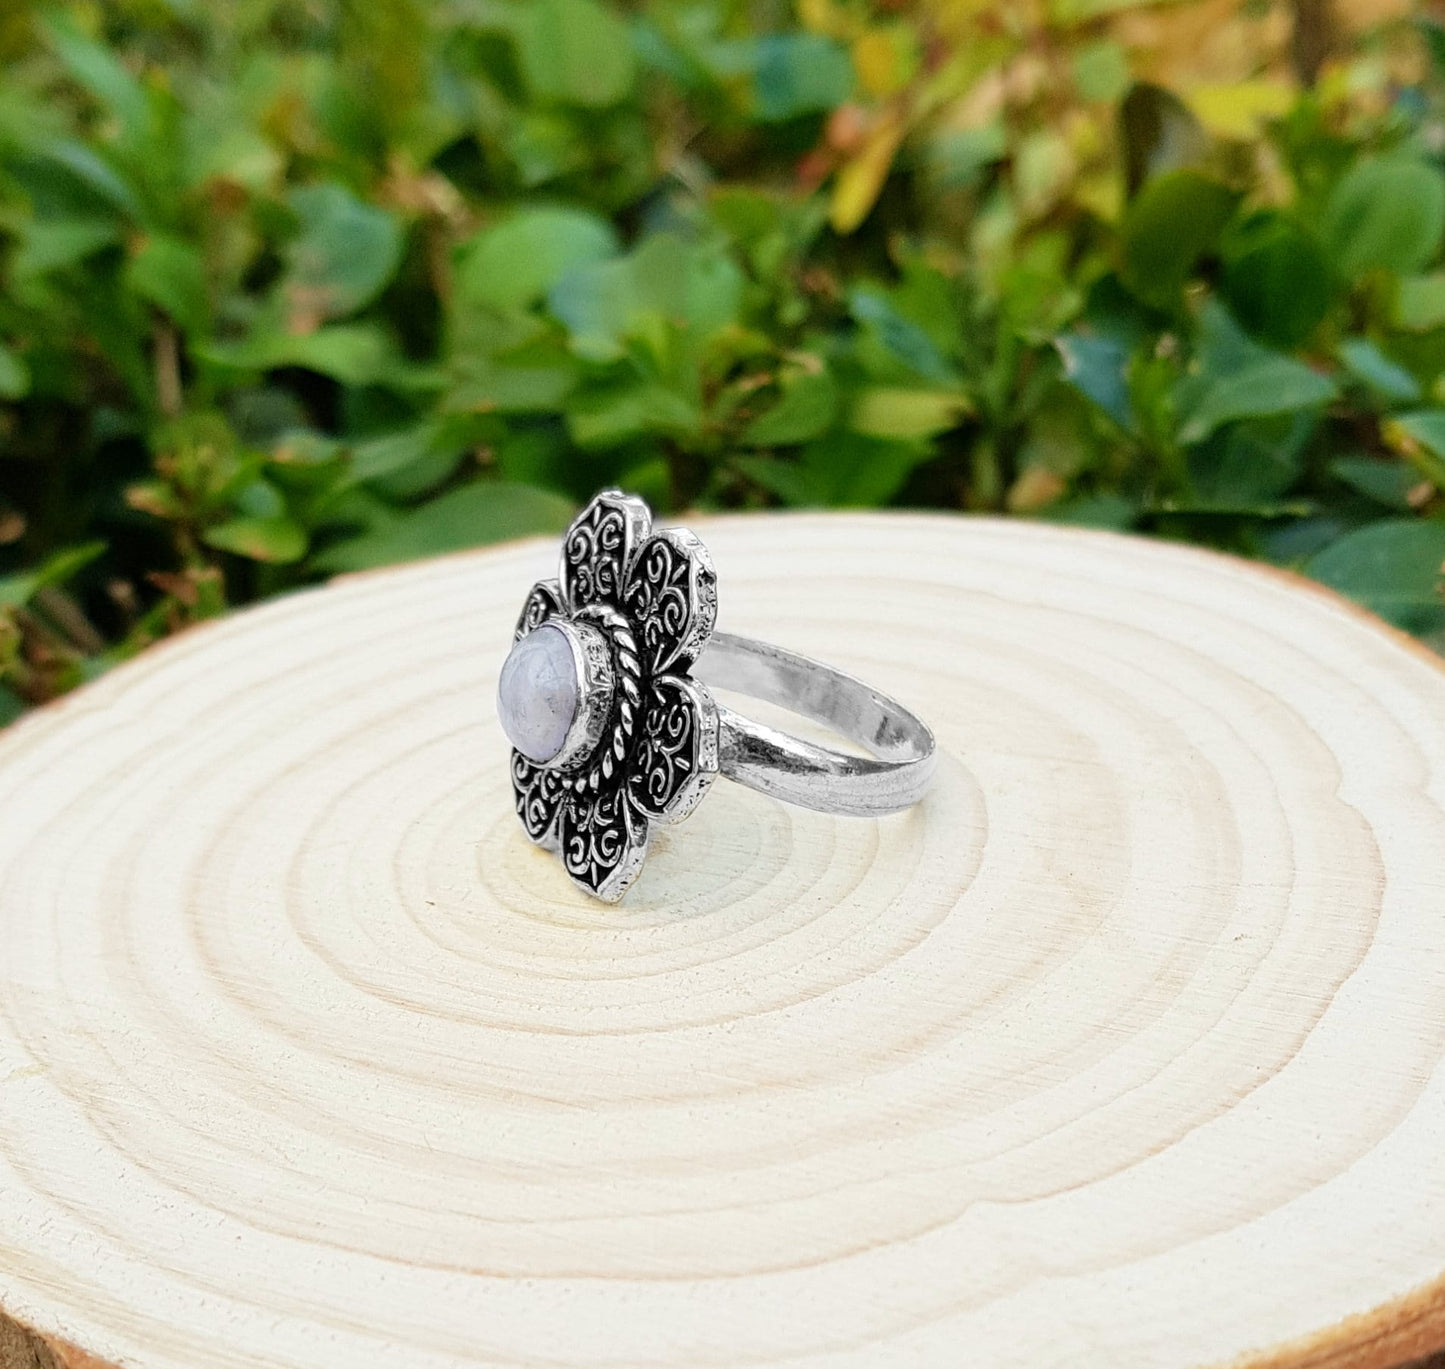 White Moonstone Flower Ring In Sterling Silver Size US 9 Statement Ring Boho Crystal Ring Gift For Women